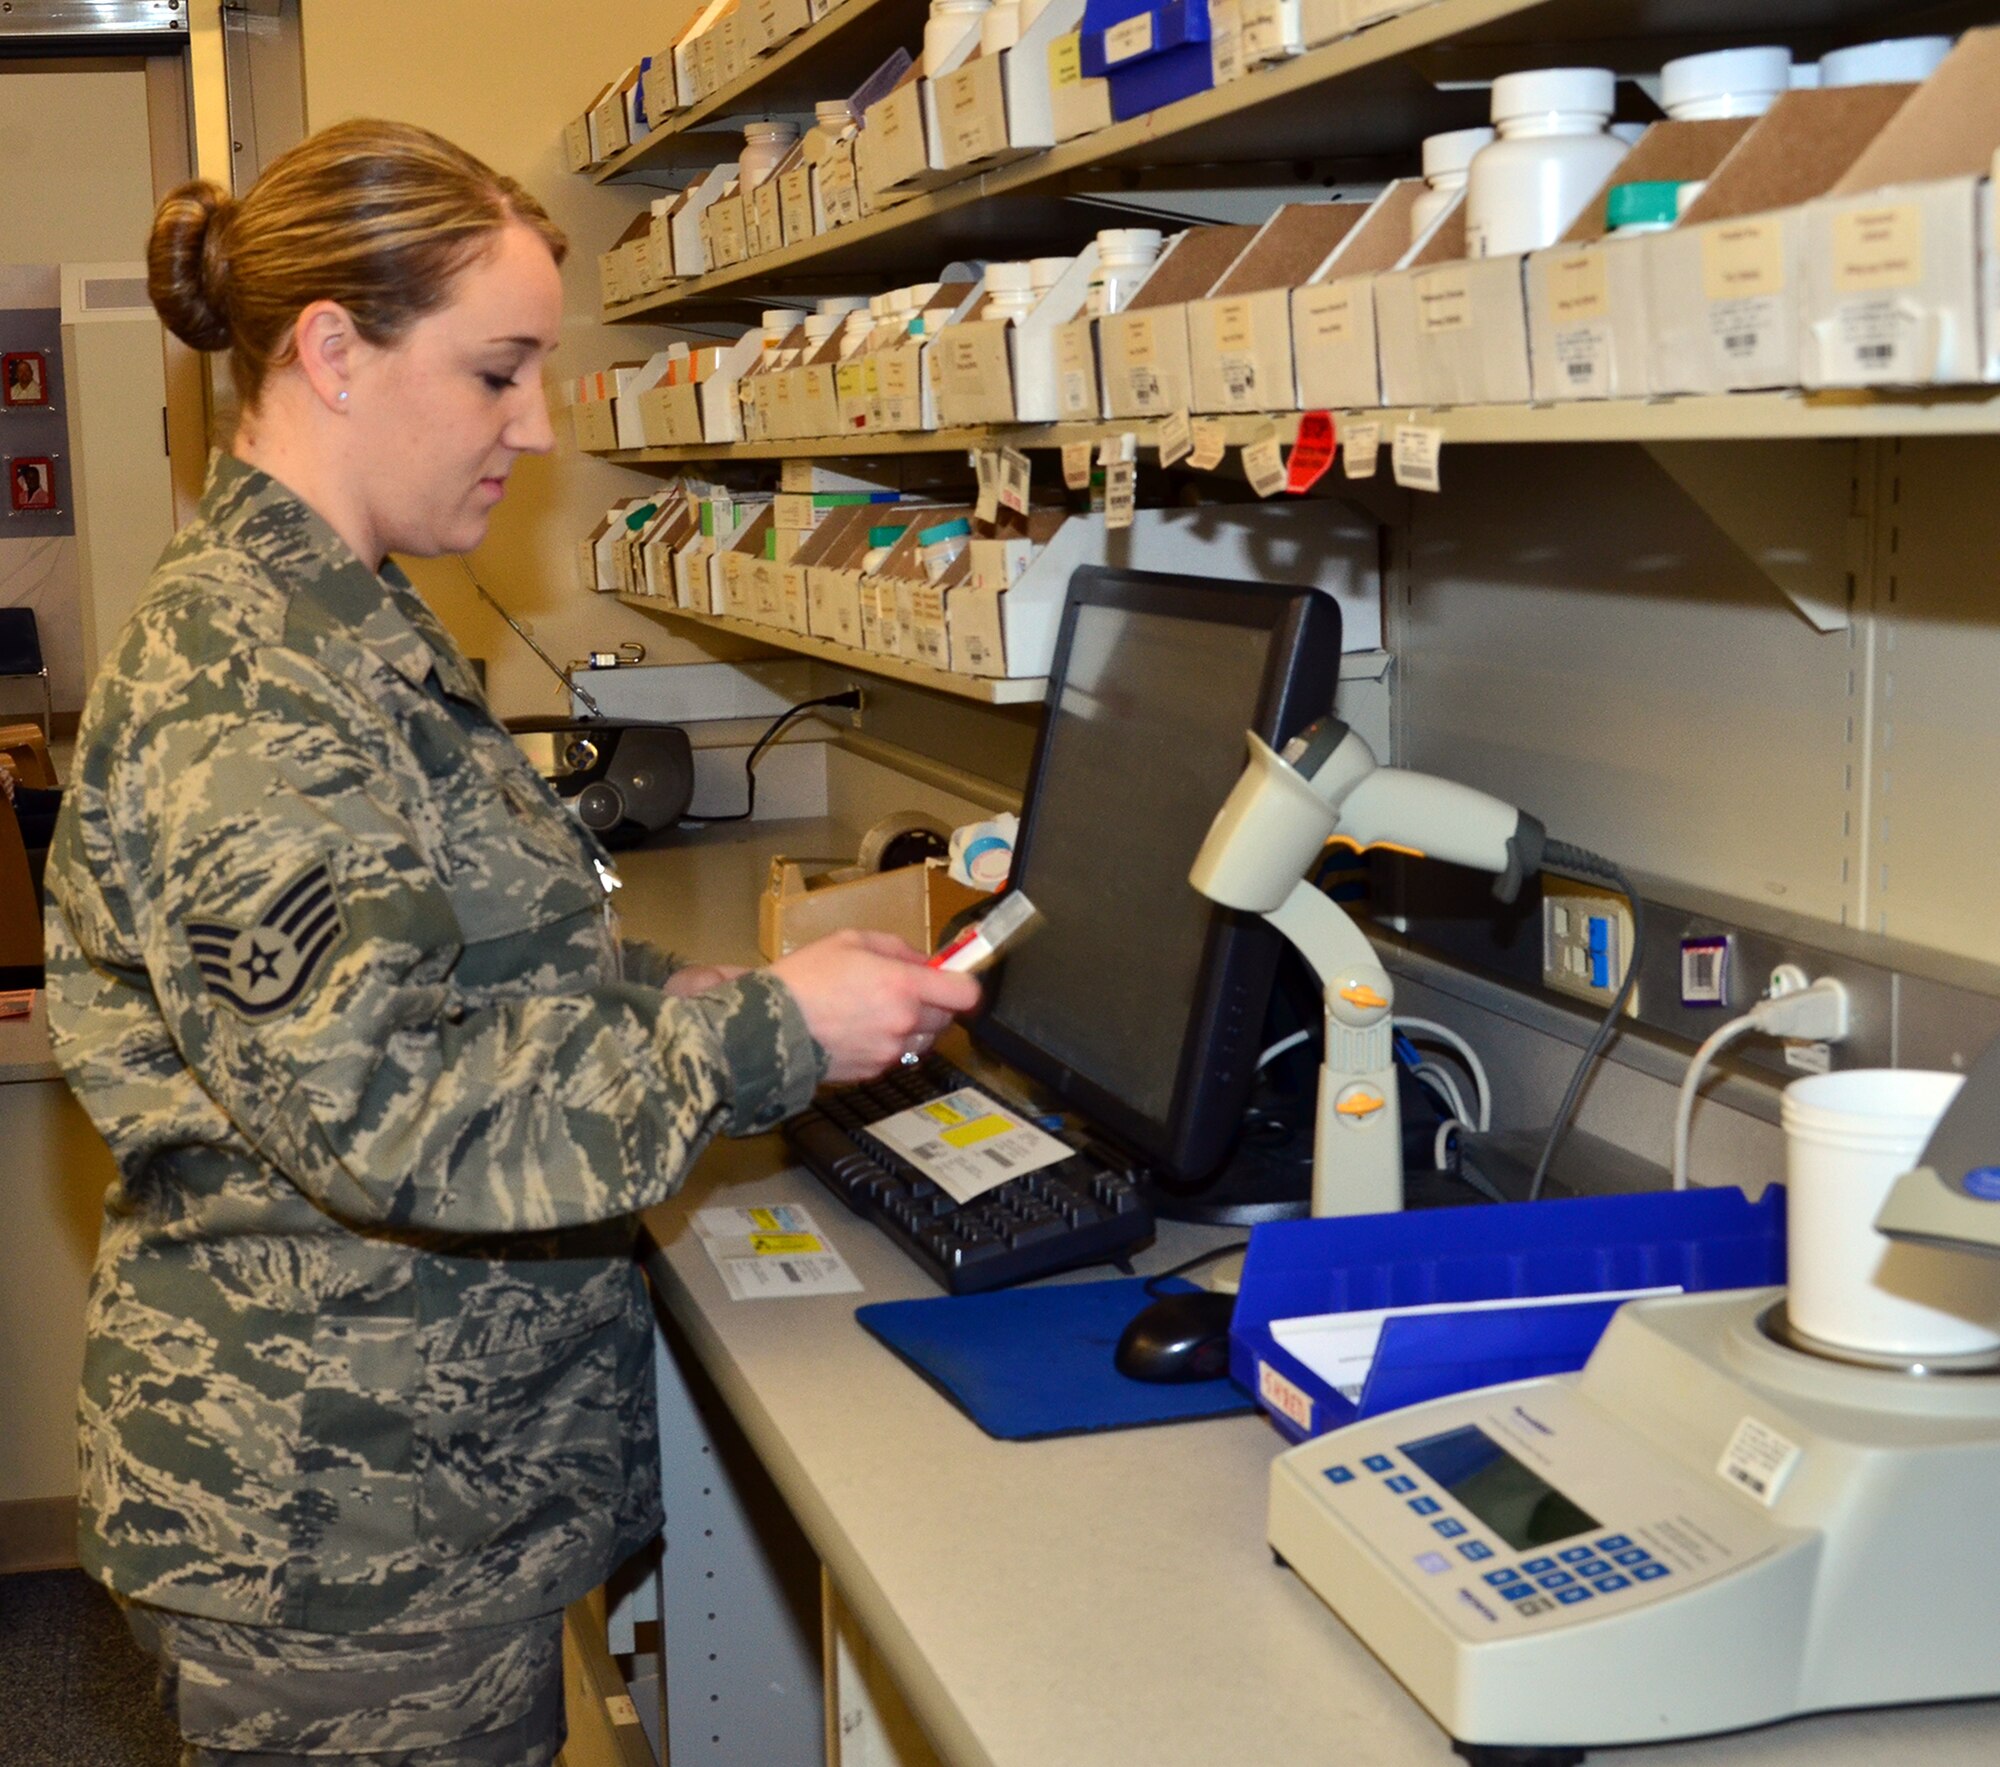 WRIGHT-PATTERSON AIR FORCE BASE, Ohio - Staff Sgt. Nichole Huck, 445th Aeromedical Staging Squadron pharmacy technician, fills prescriptions at the Wright-Patterson Air Force Base Medical Center April 15. Twenty-two ASTS Airmen conducted their annual tour April 6 – 20 at the WPAFB Medical Center where they received training in job classification skills, sustainment and readiness skills in various departments to include the laboratory, pharmacy, nursing, medical administration, surgical technology and radiology. (U.S. Air Force photo/Lt. Col. Cynthia Harris)